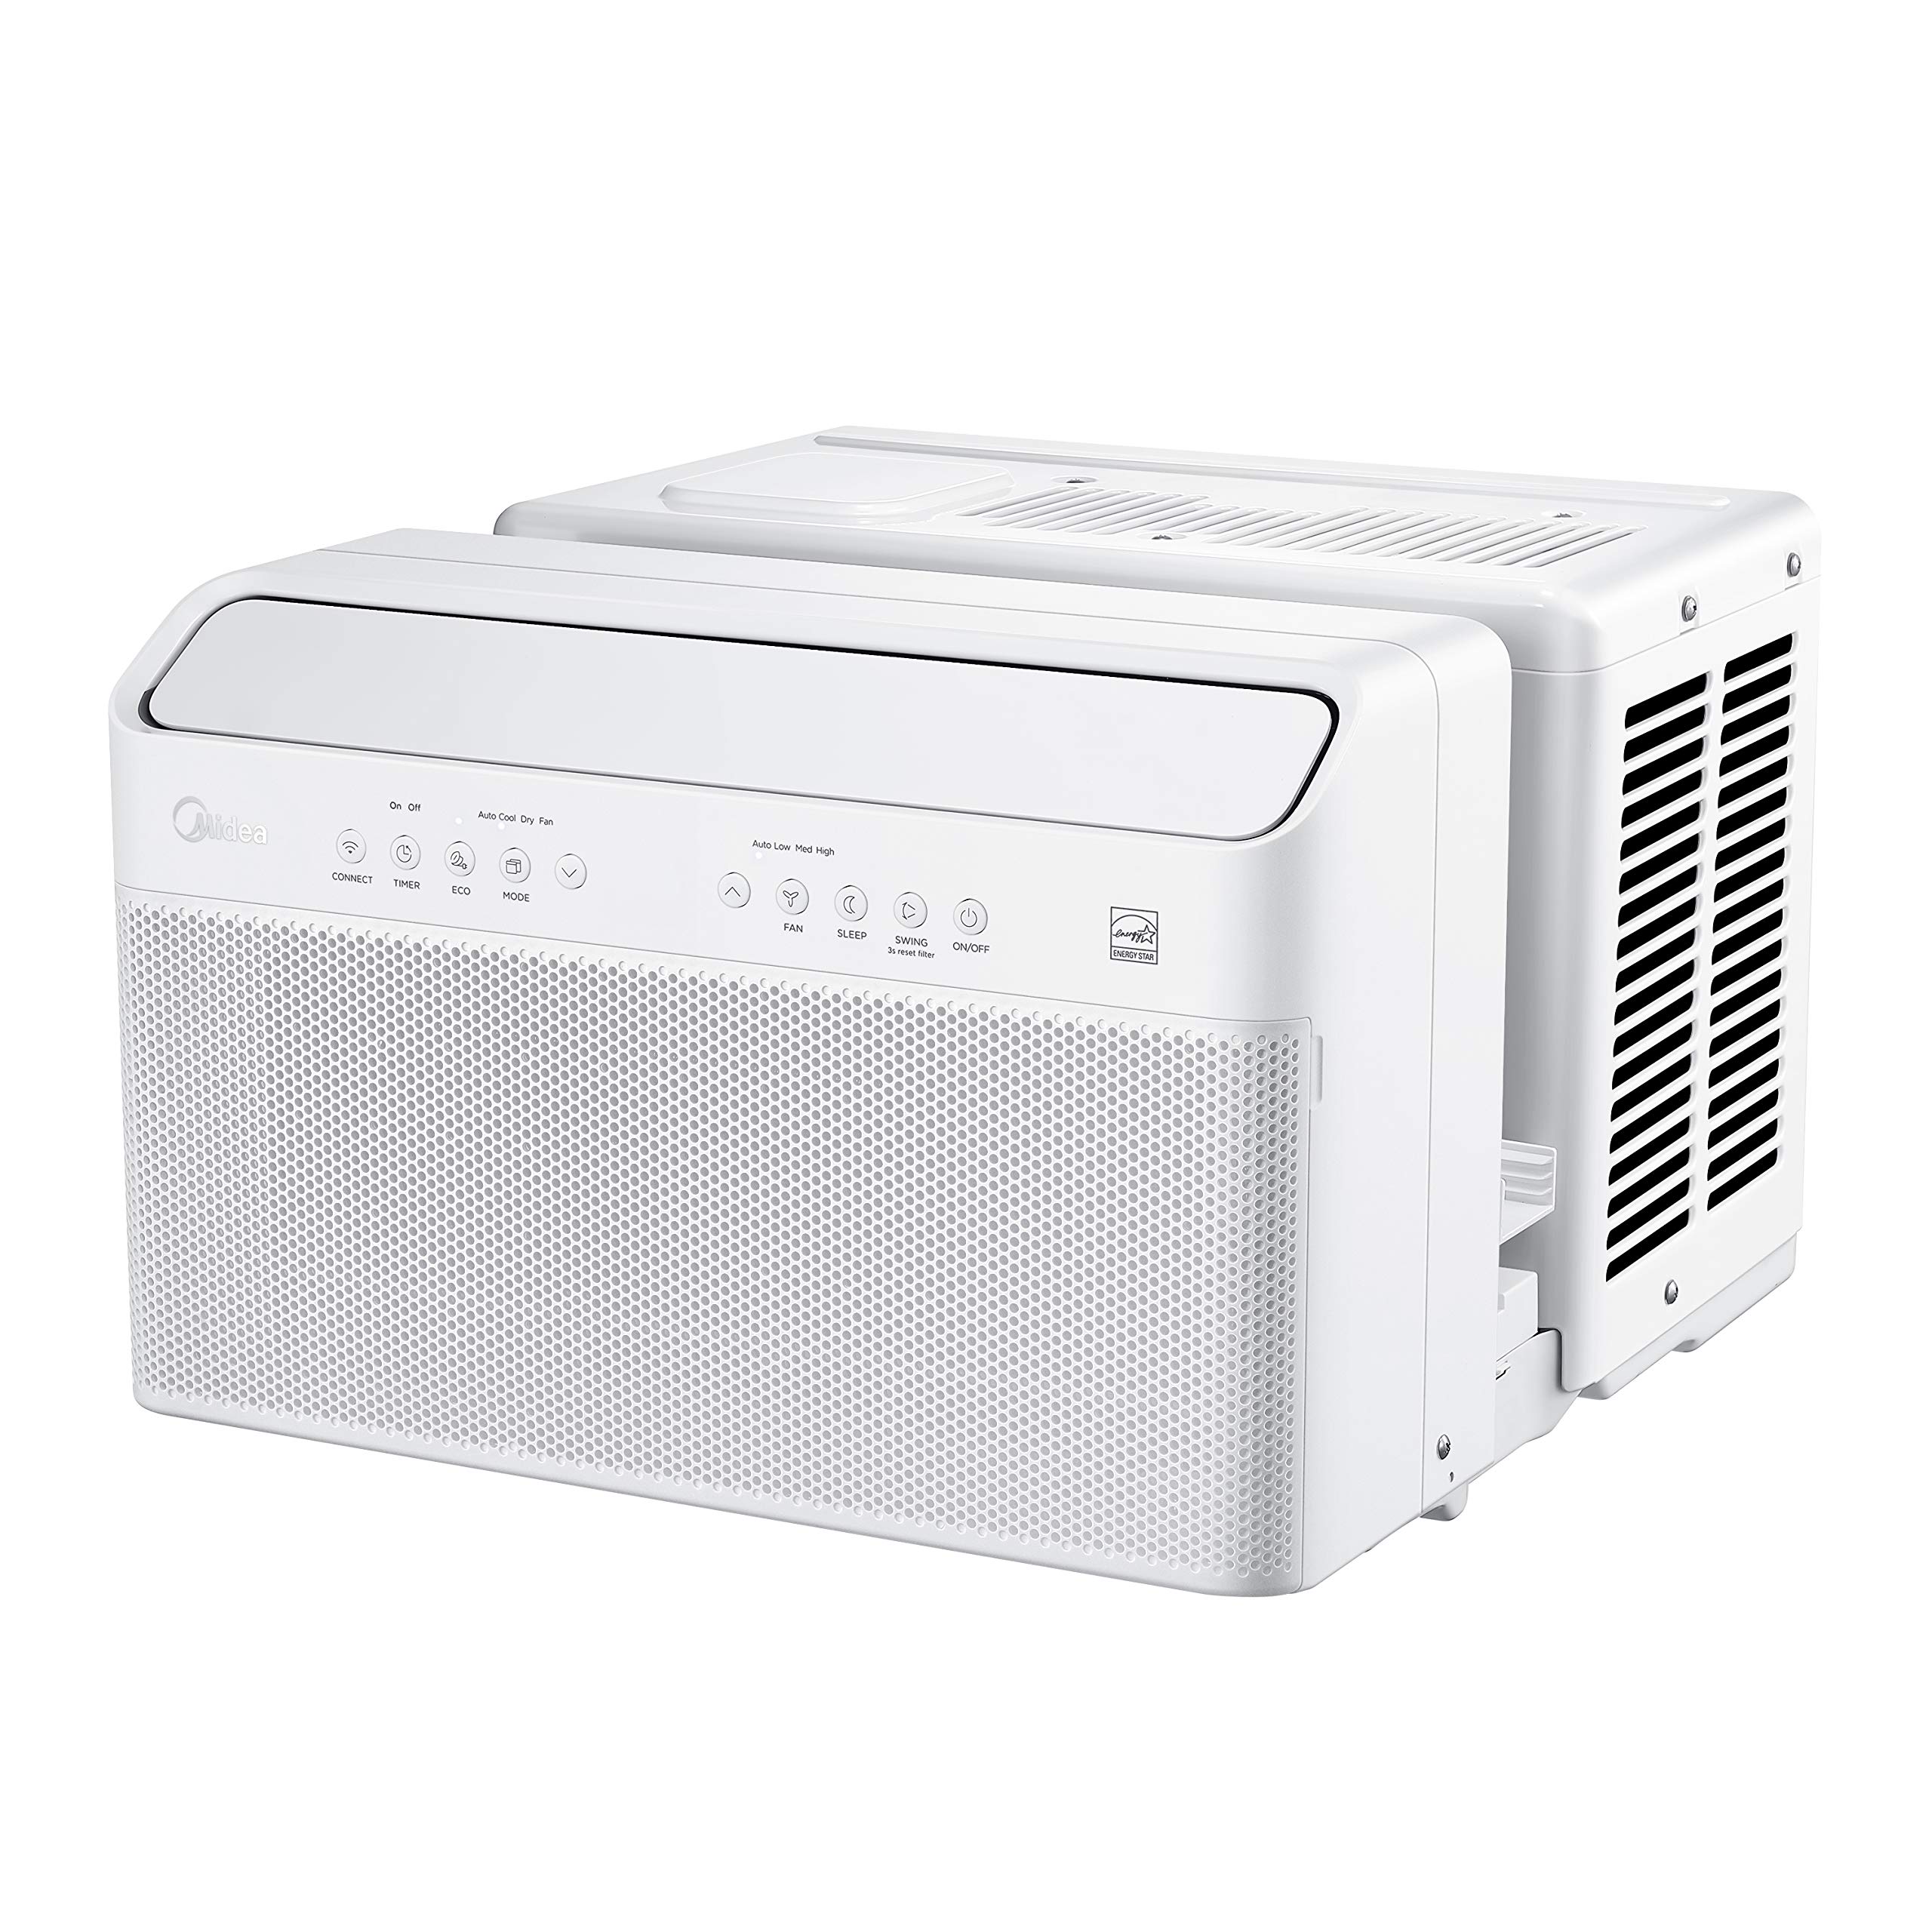 Midea 8,000 BTU U-Shaped Smart Inverter Window Air conditioner-cools up to 350 Sq Ft, Ultra Quiet with Open Window Flexibility, 